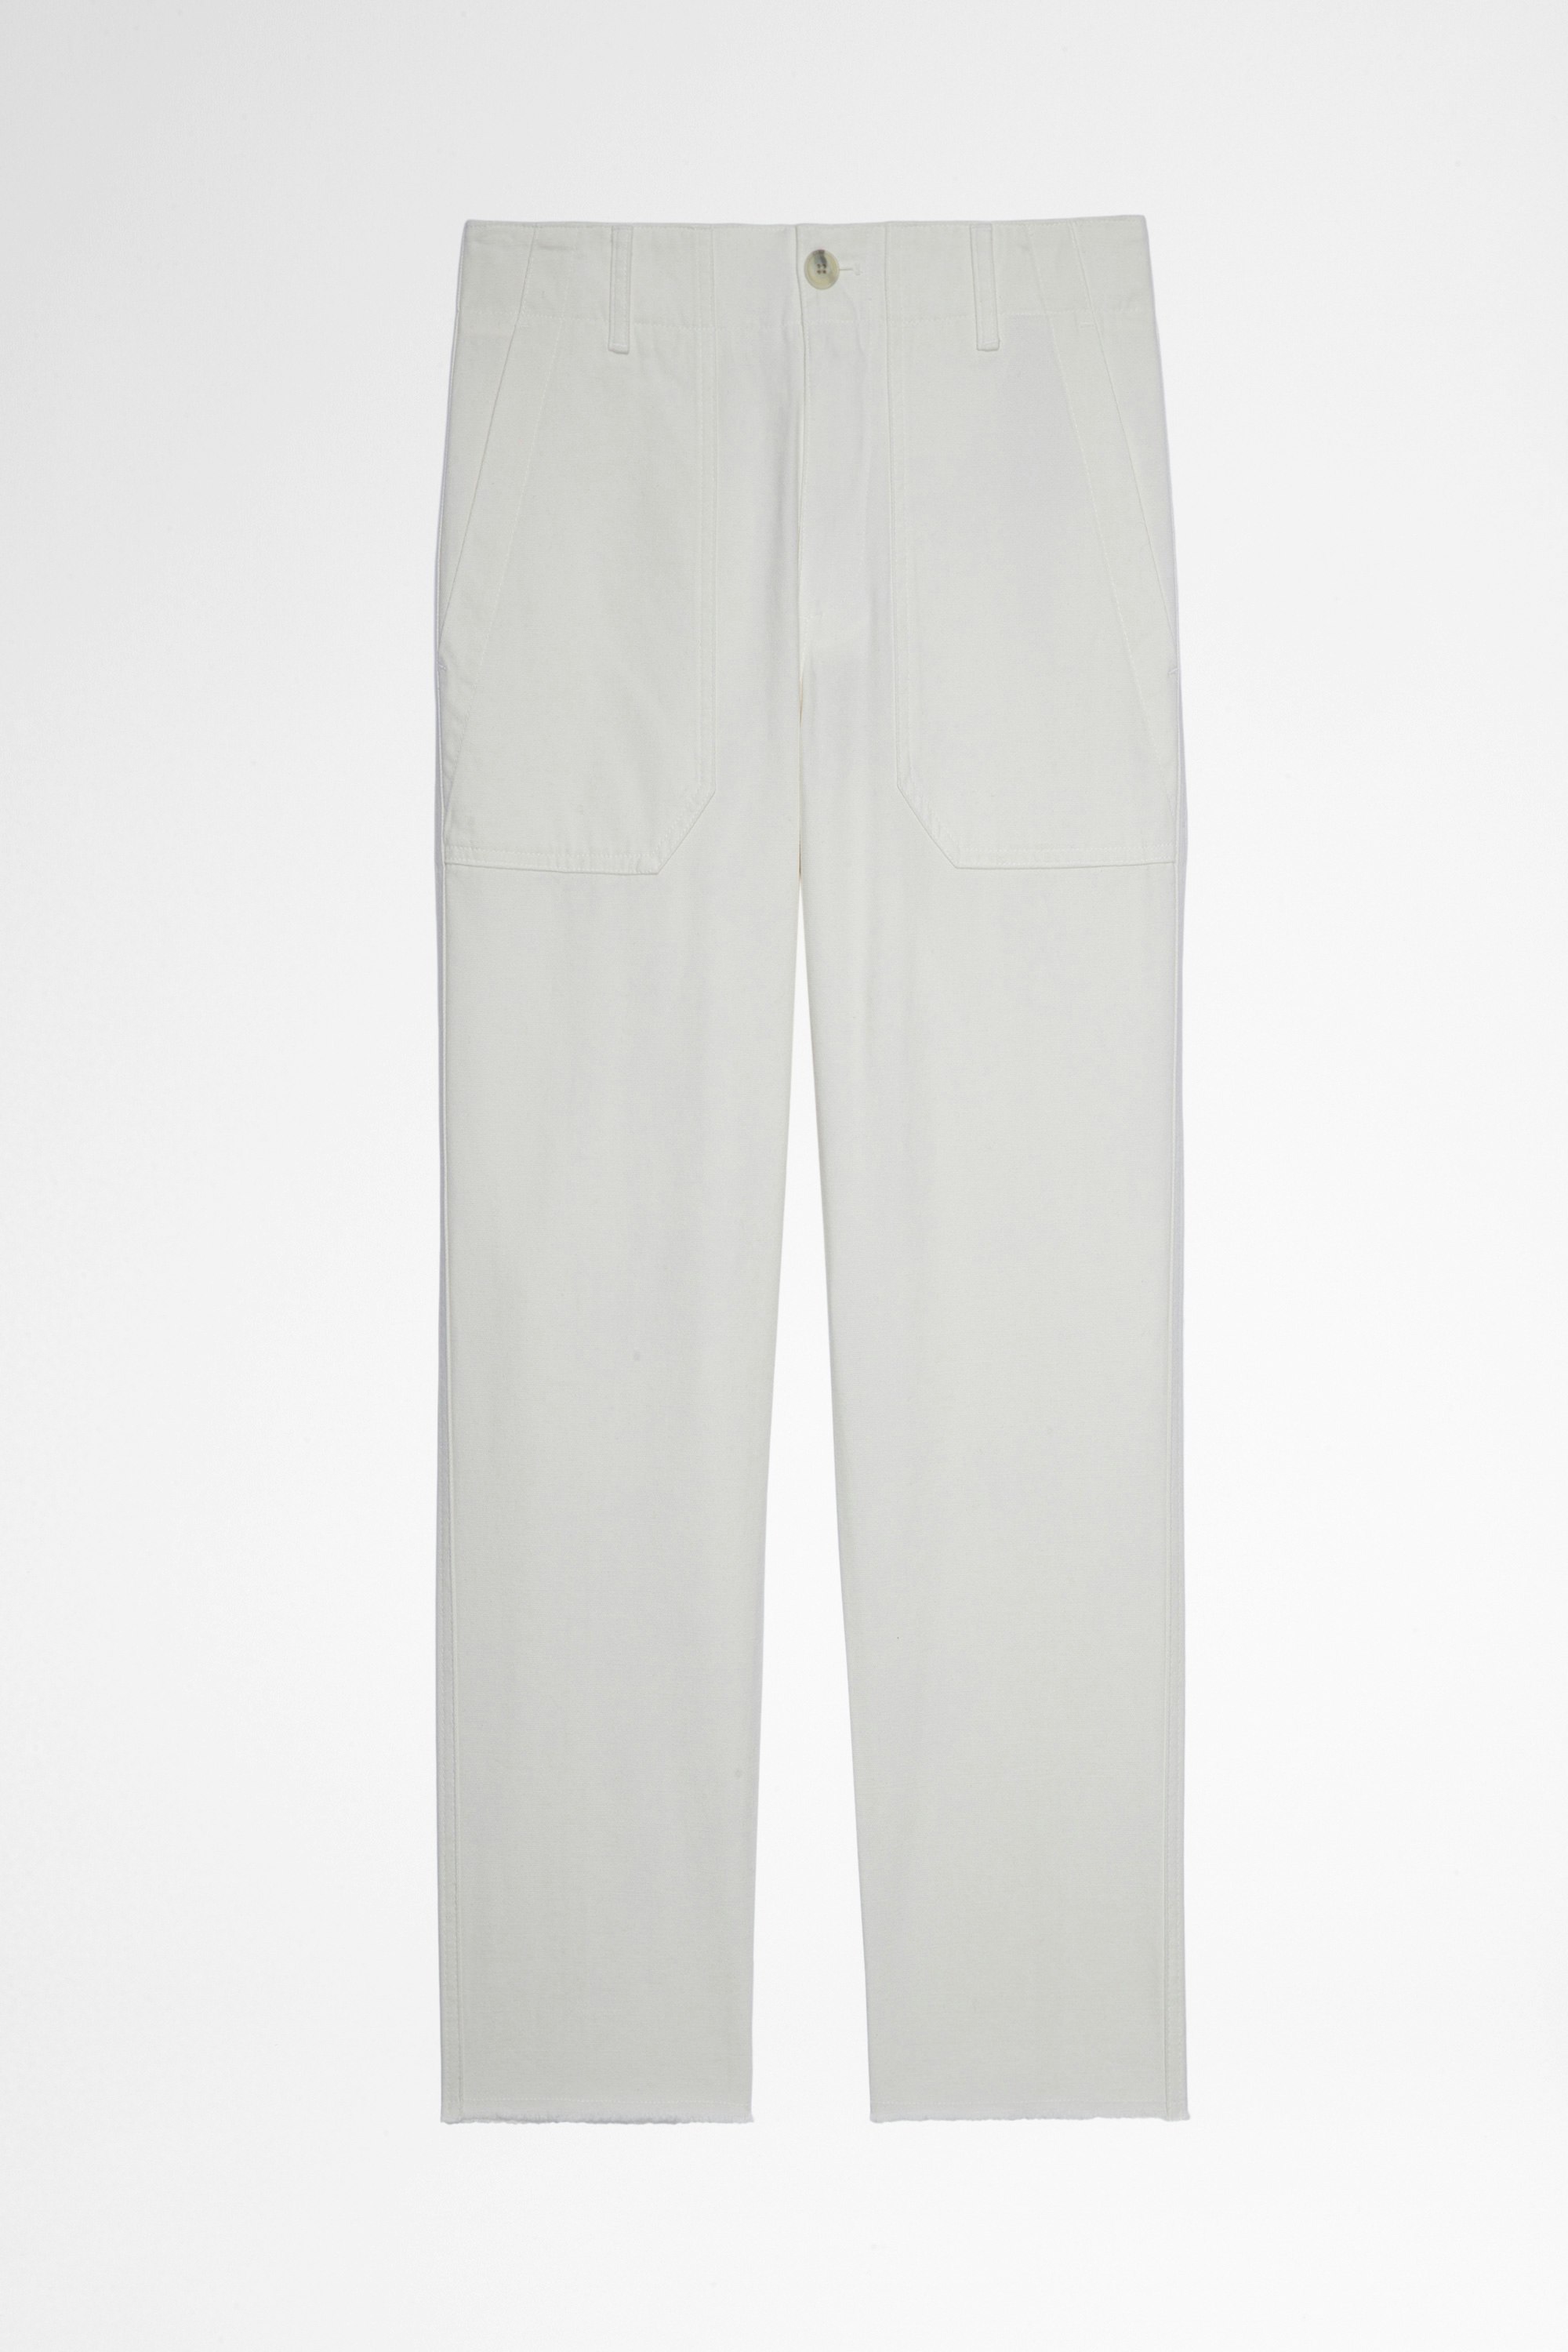 Projet Trousers Women's white cotton 7/8 length trousers